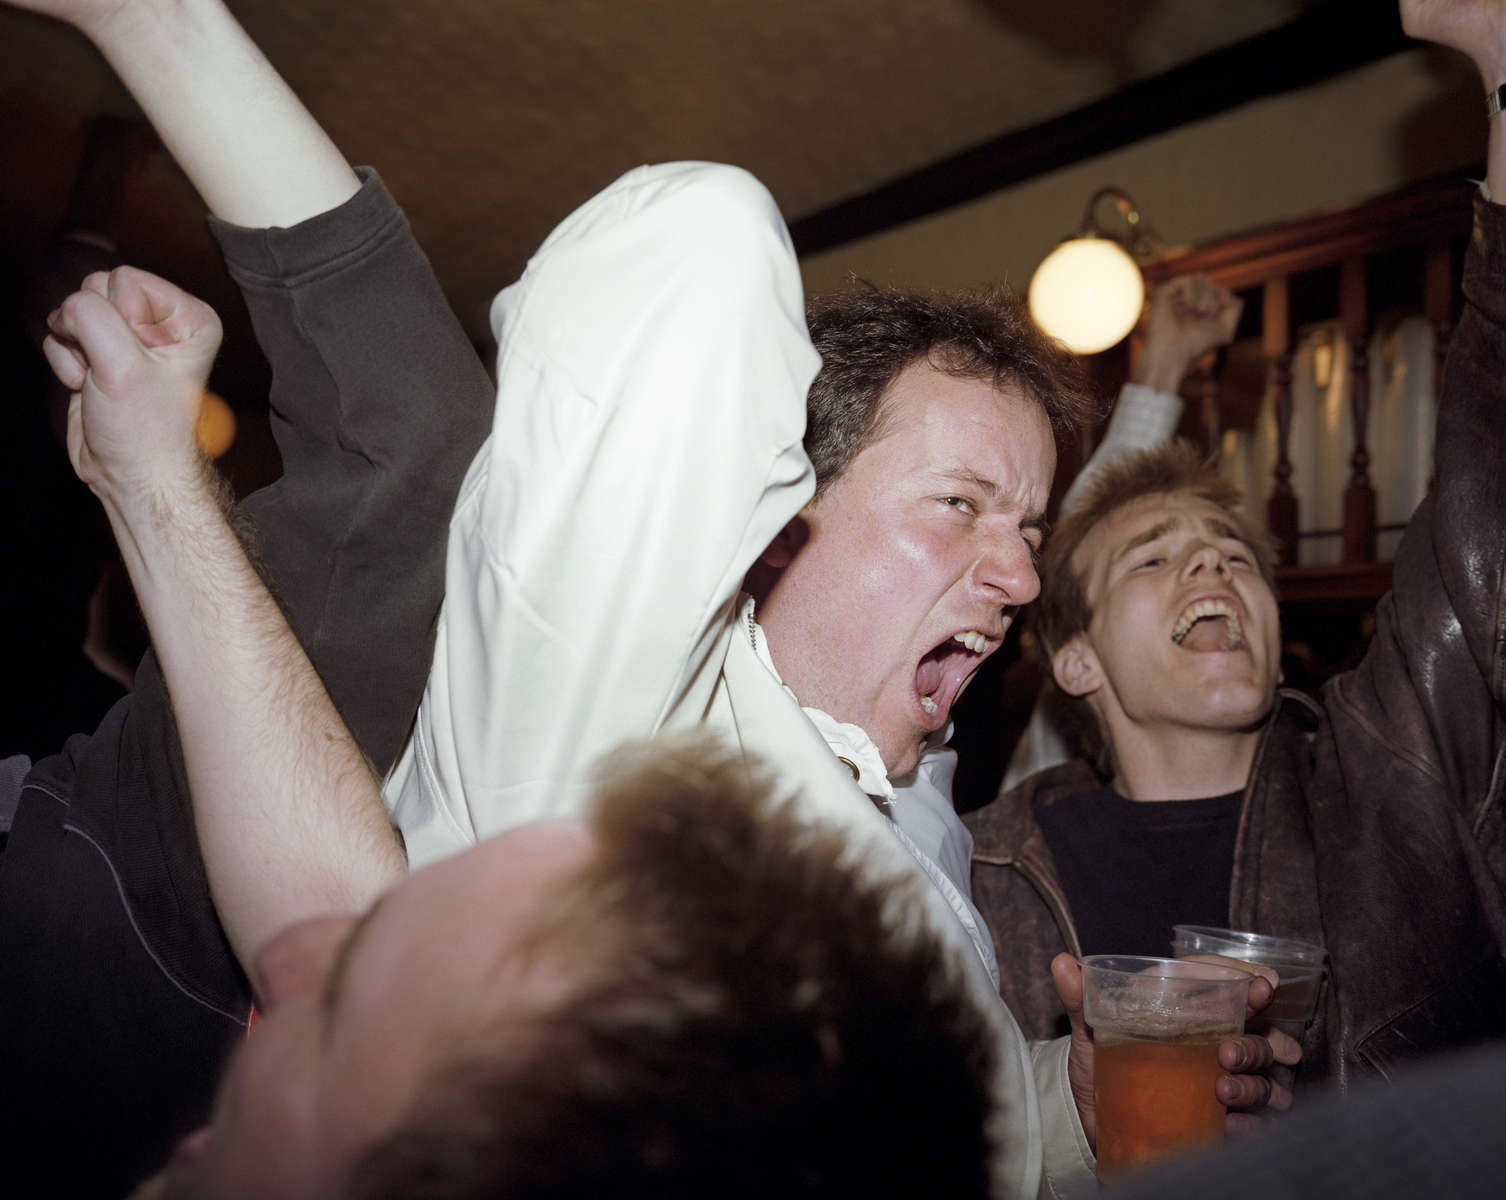 In a south London pub, England football fans celebrate a goal during a World Cup qualifier against Sweden. March 2001